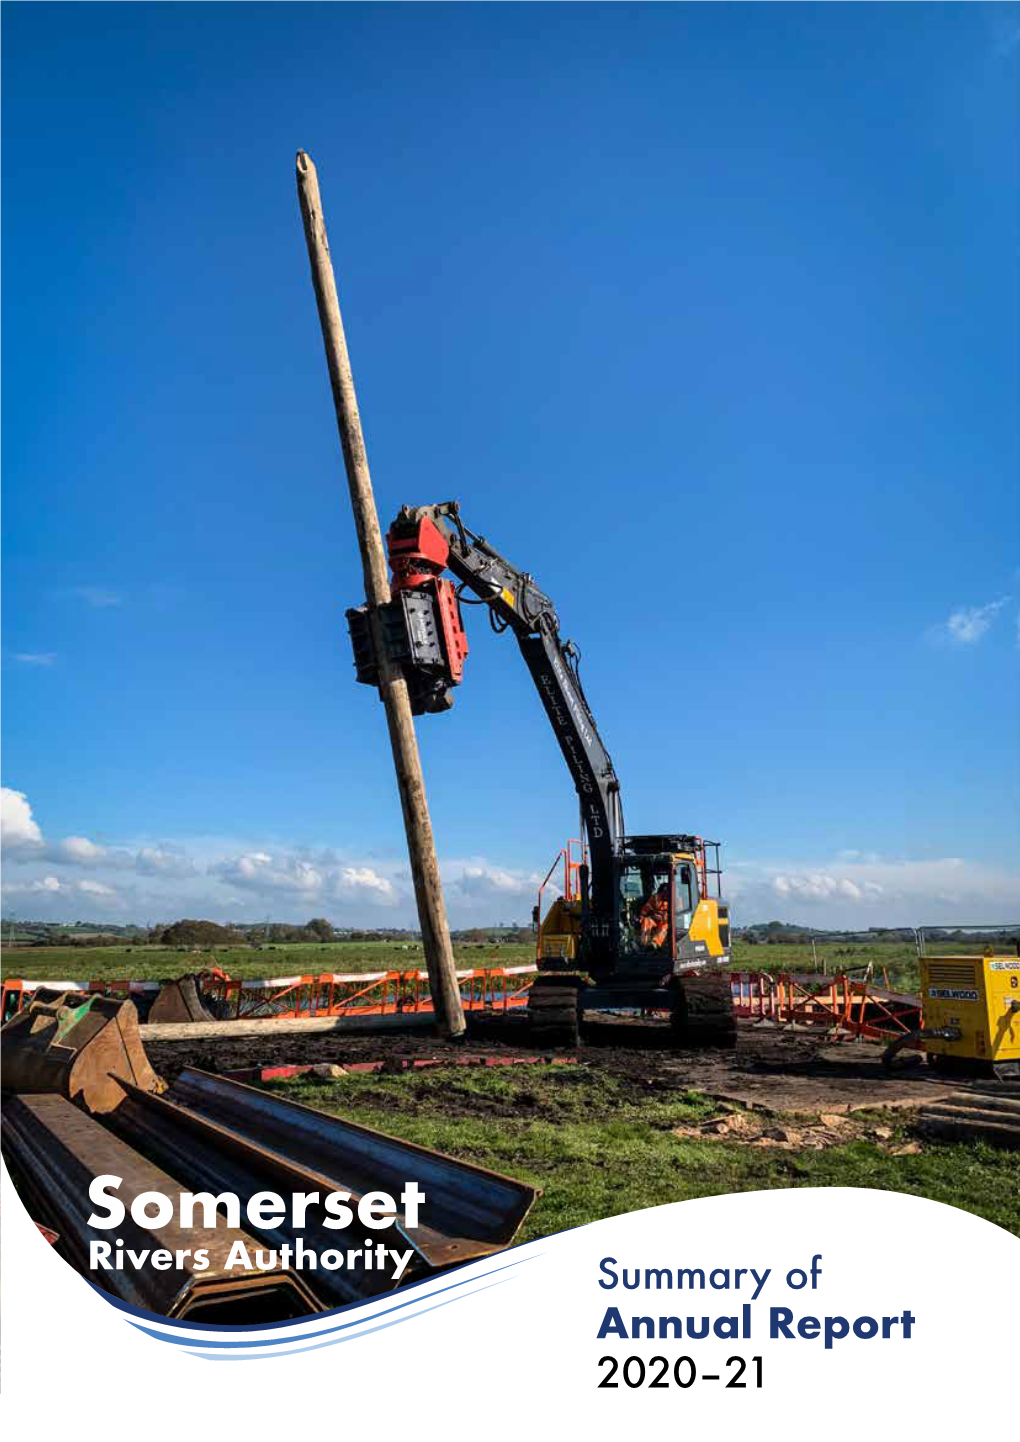 Somerset Rivers Authority Annual Report 2020/21